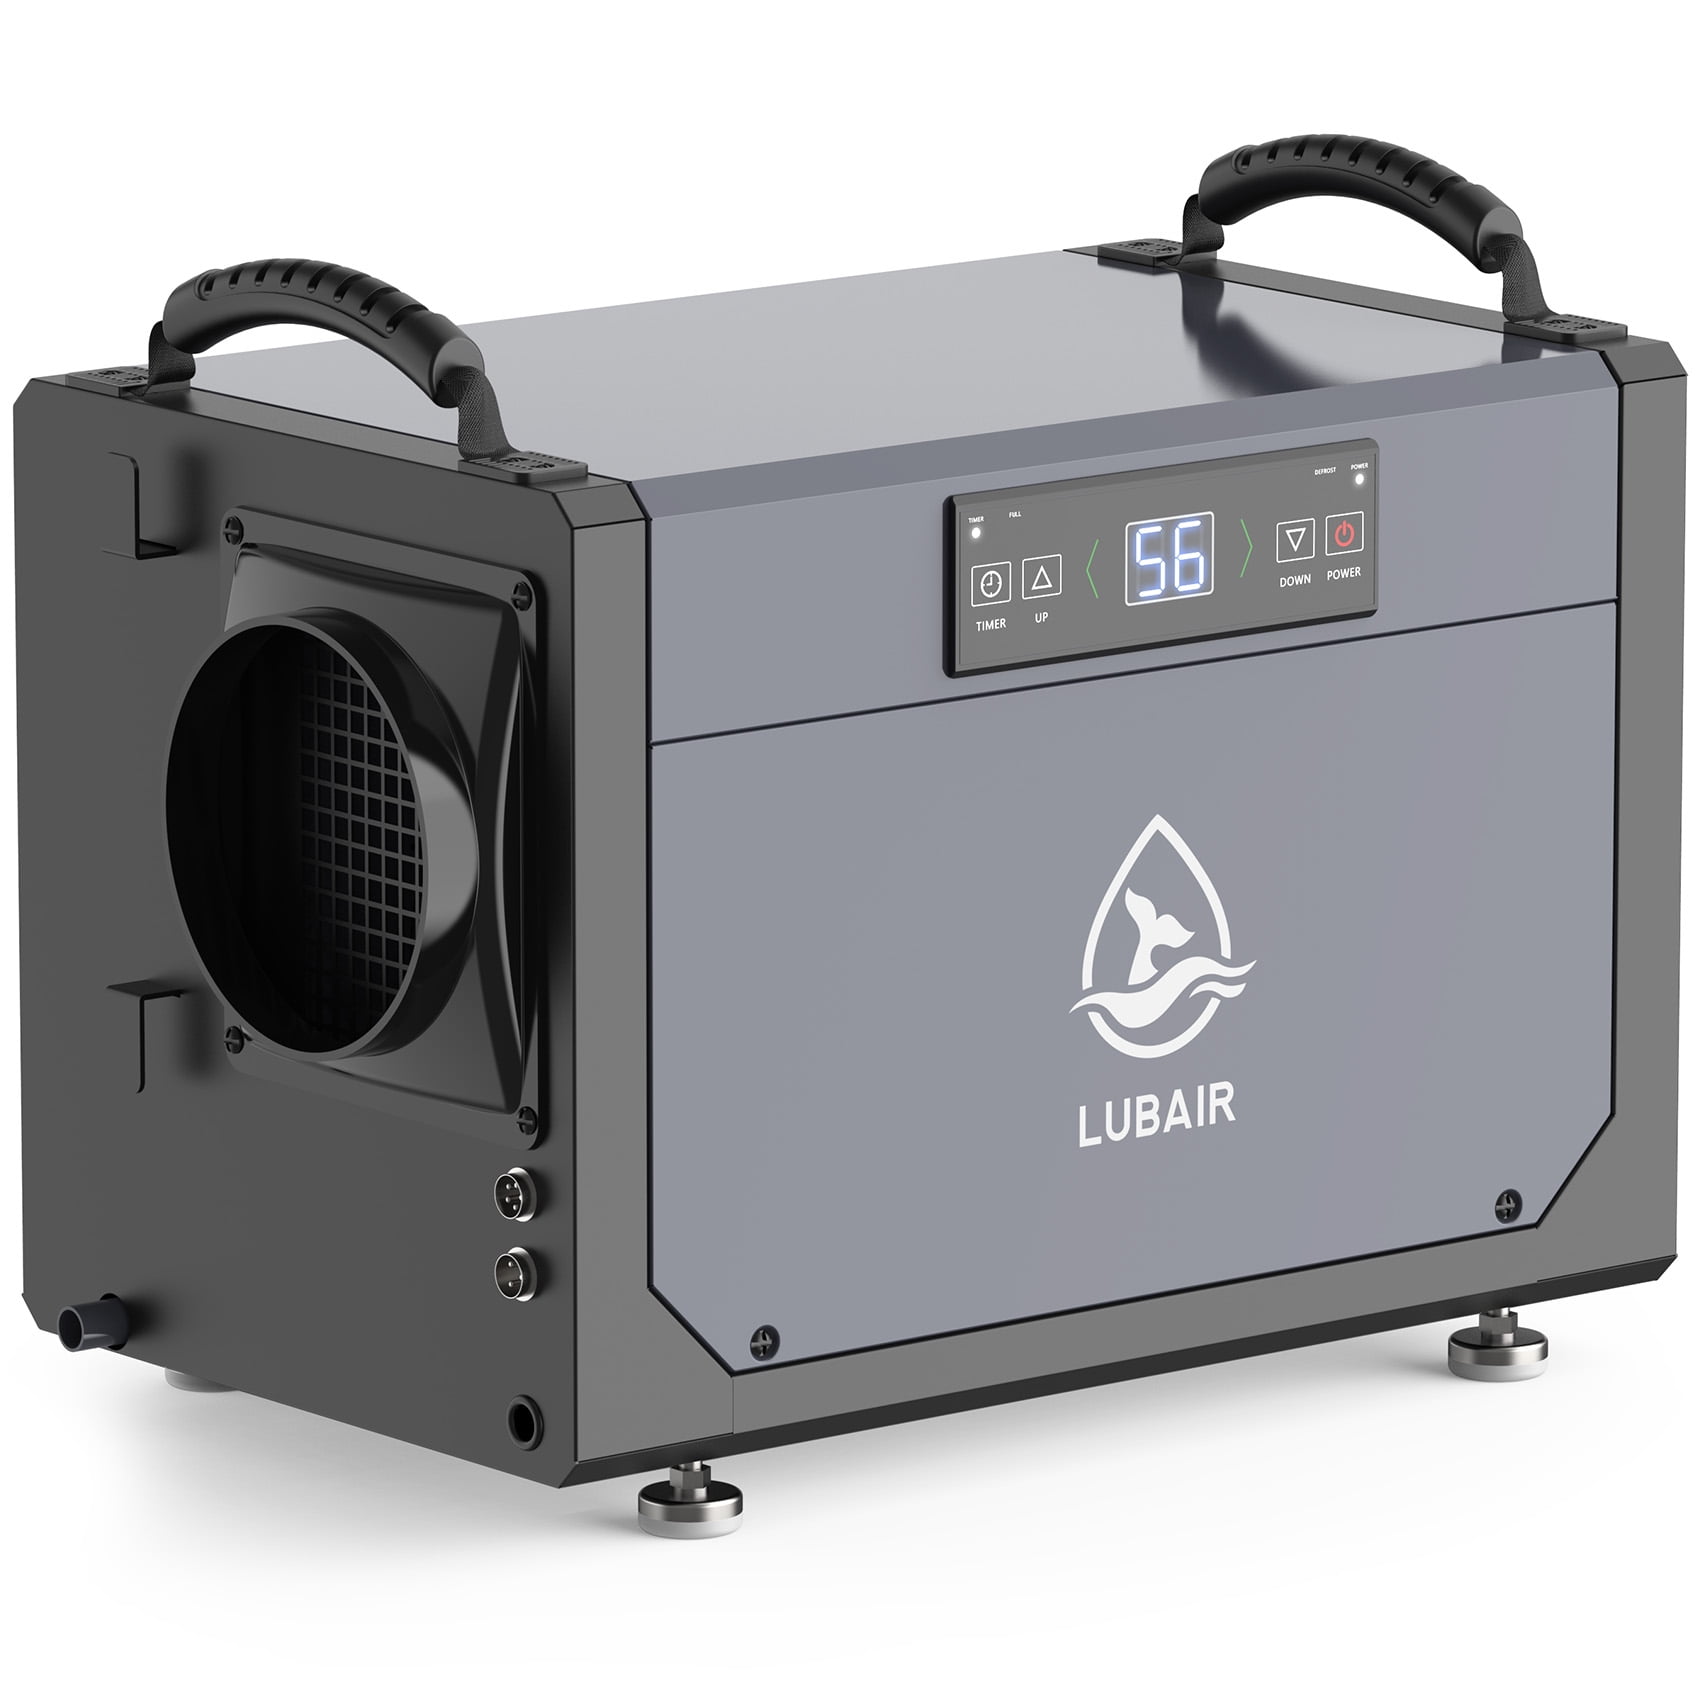 LUBAIR 120-Pint Crawl Space Dehumidifier for Basement, Commercial Dehumidifier with Drainage Hose - image 1 of 7